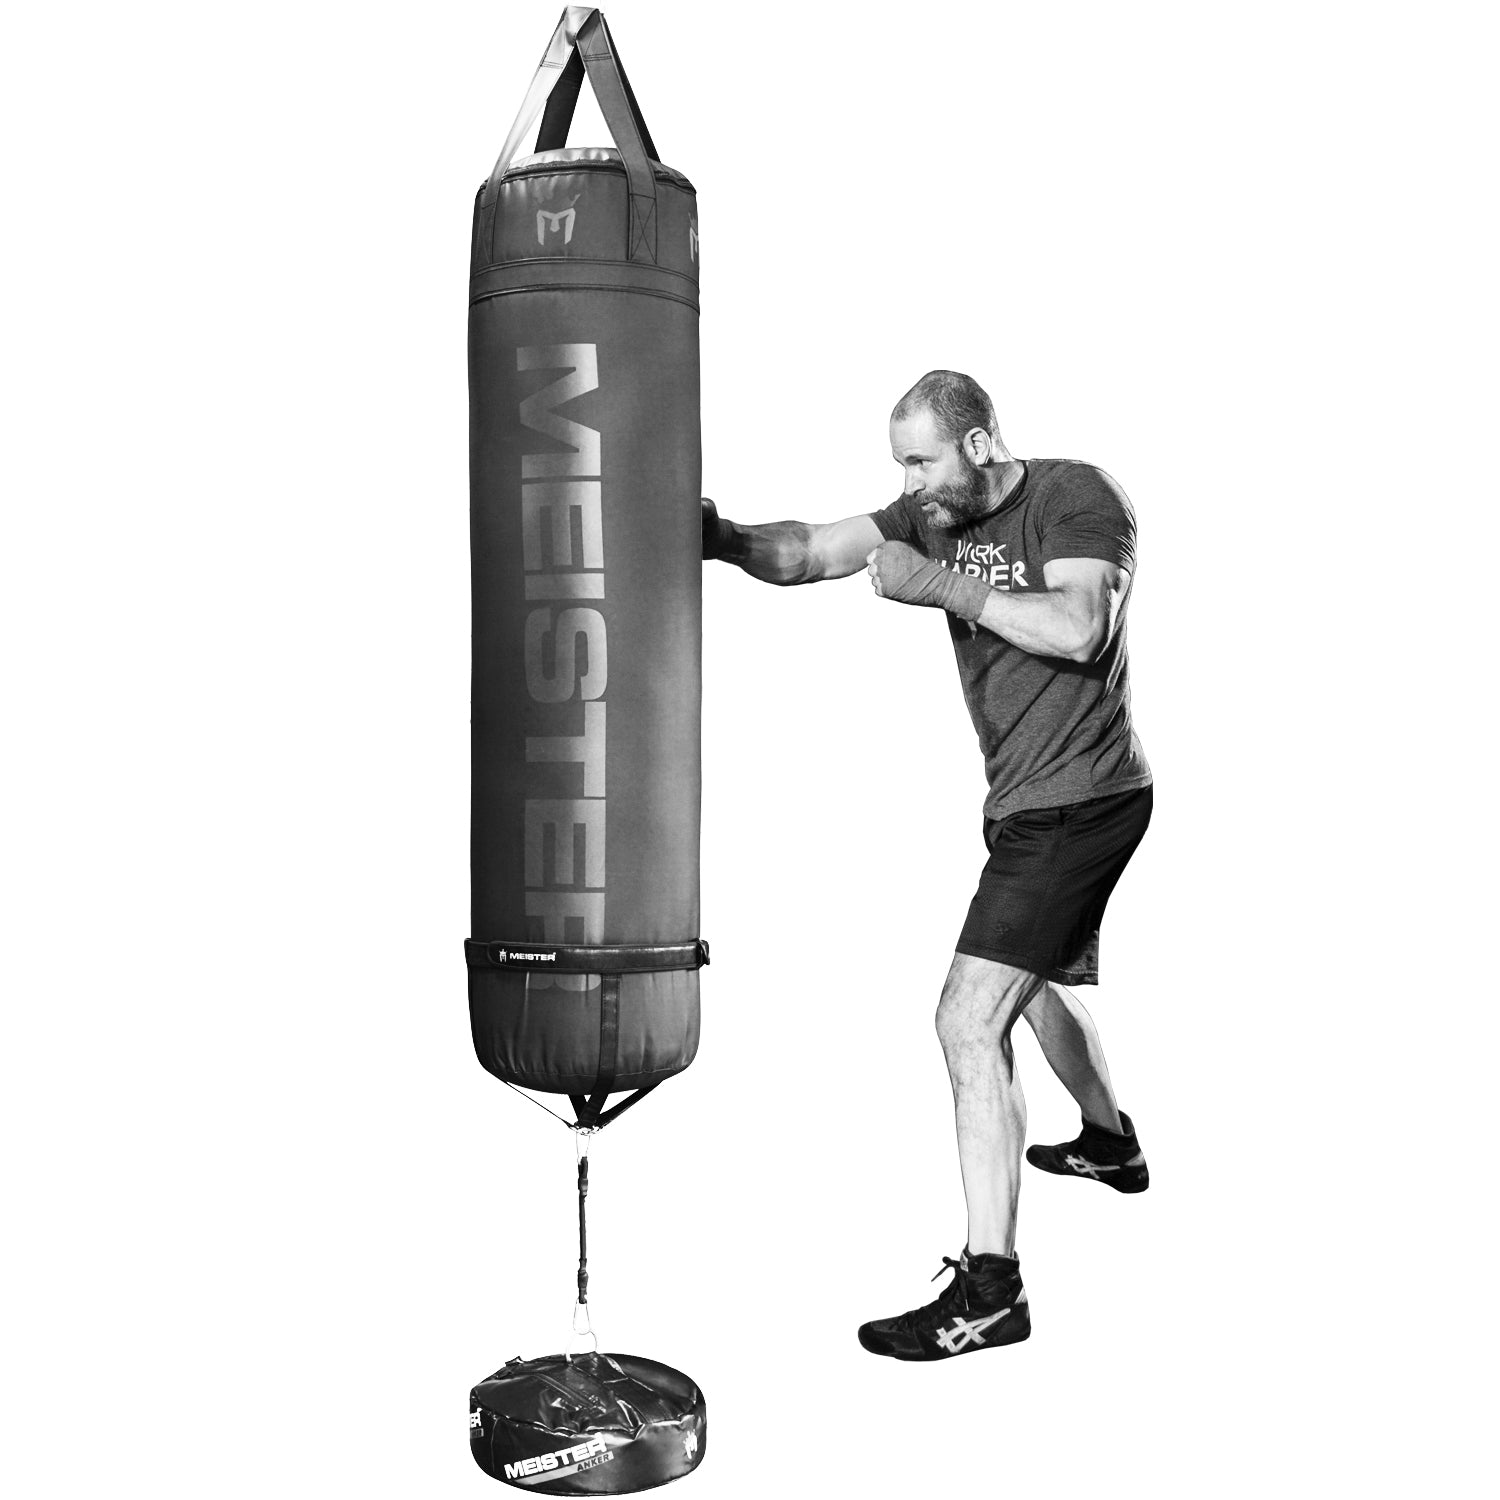 Meister Double-End Attachment Kit for Anchoring Heavy Bags